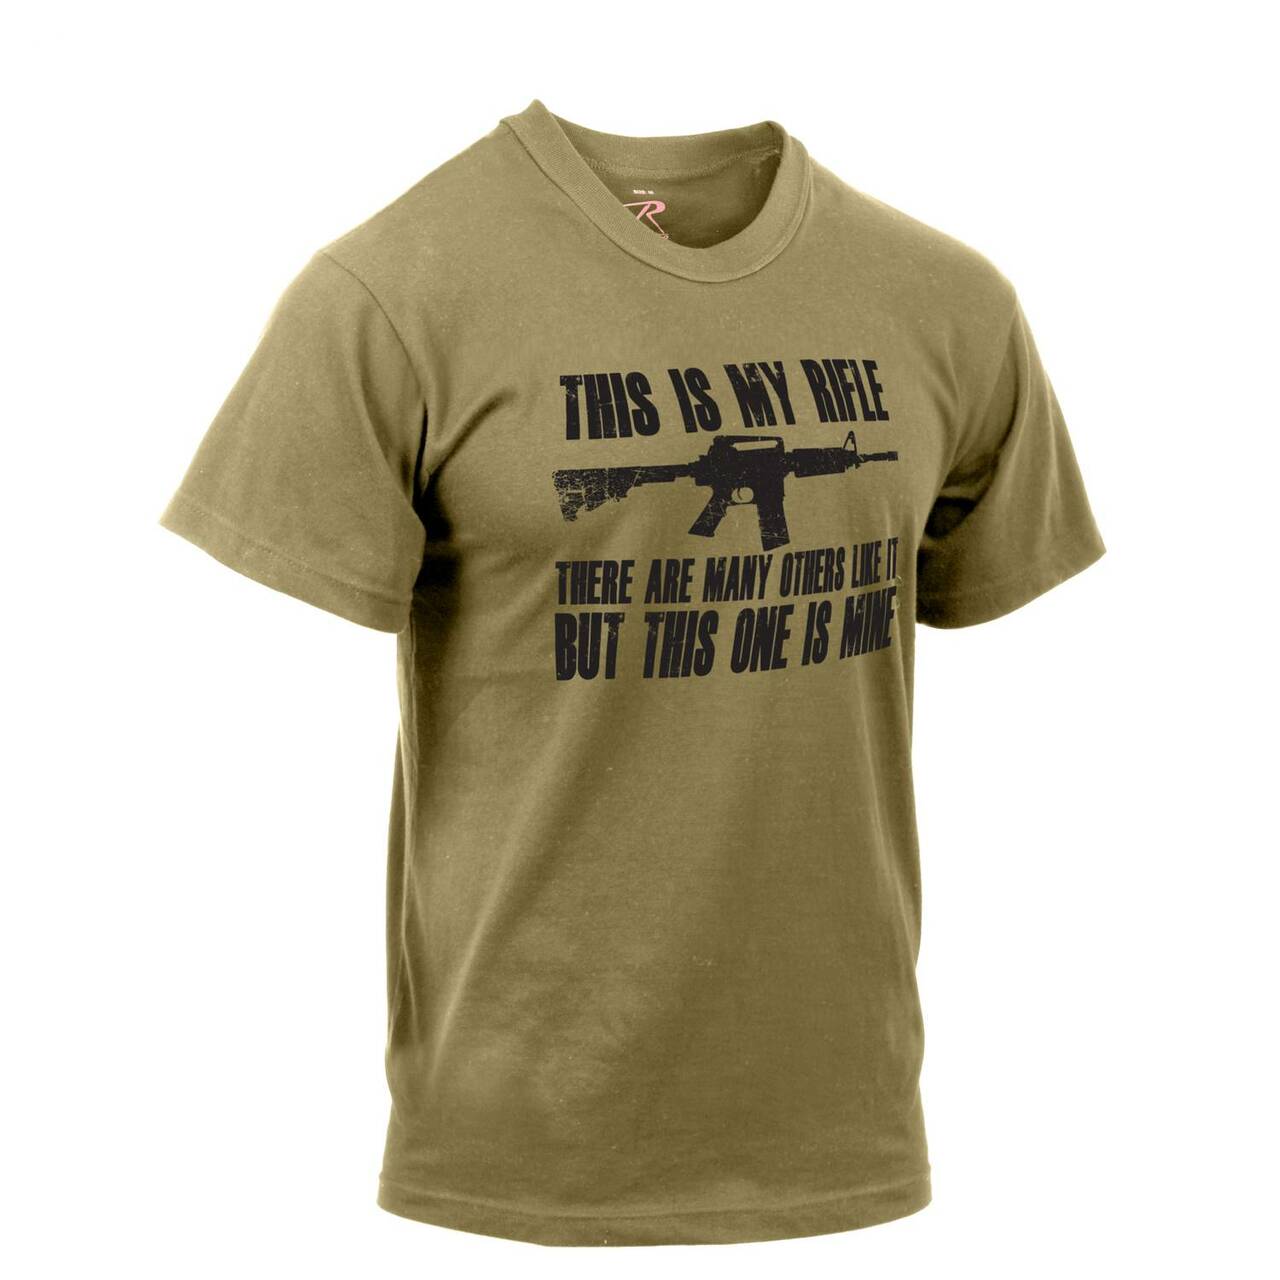 “This Is My Rifle” T-Shirt – Coyote Brown | Rothco